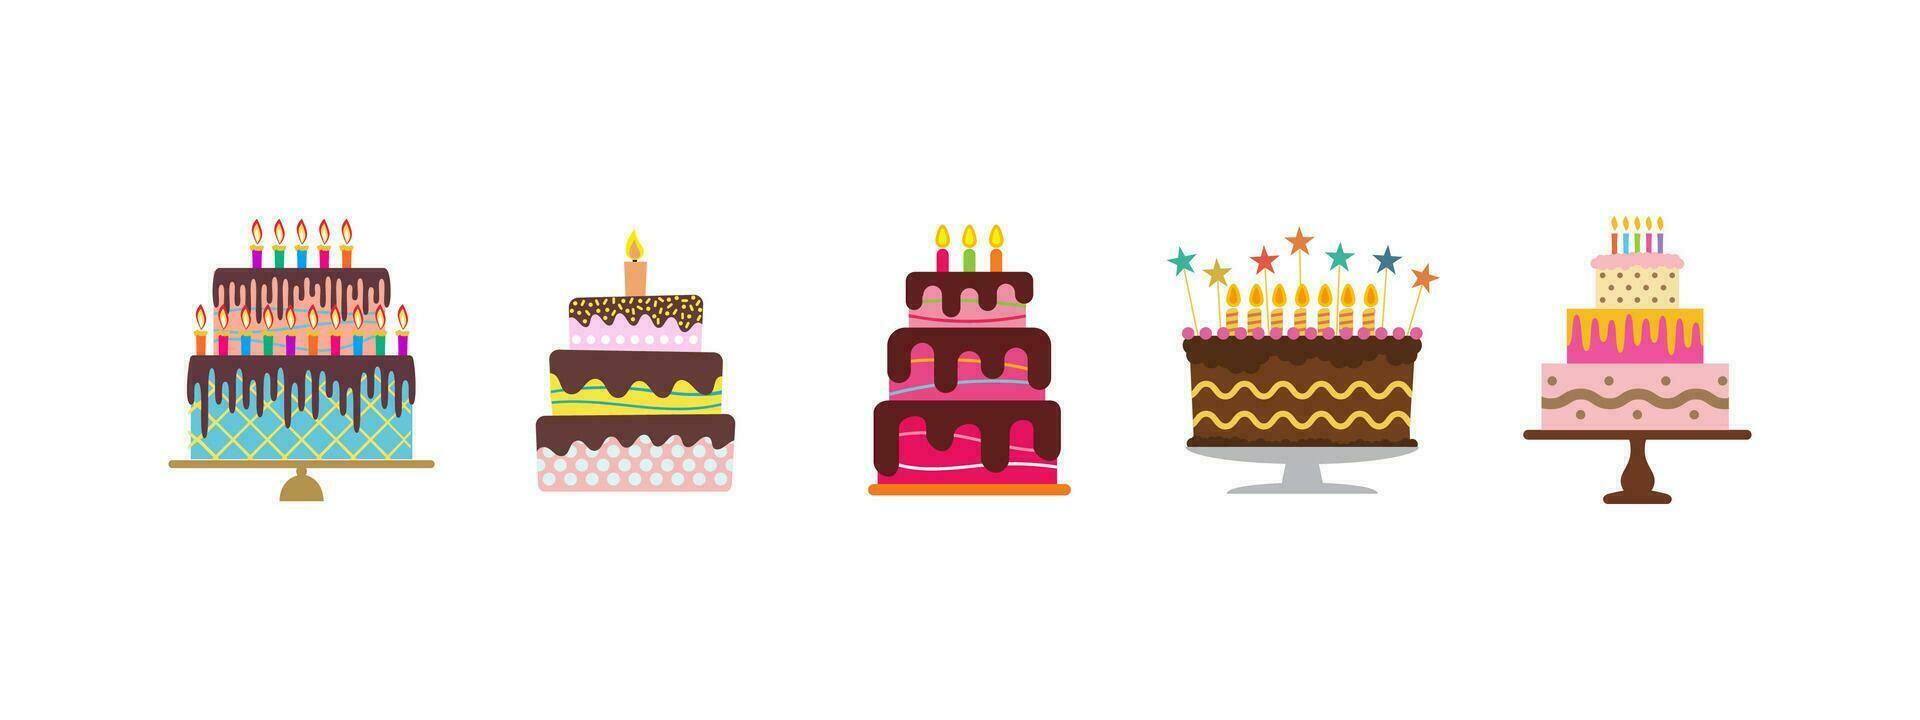 Sweet birthday cakes with burning candles vector